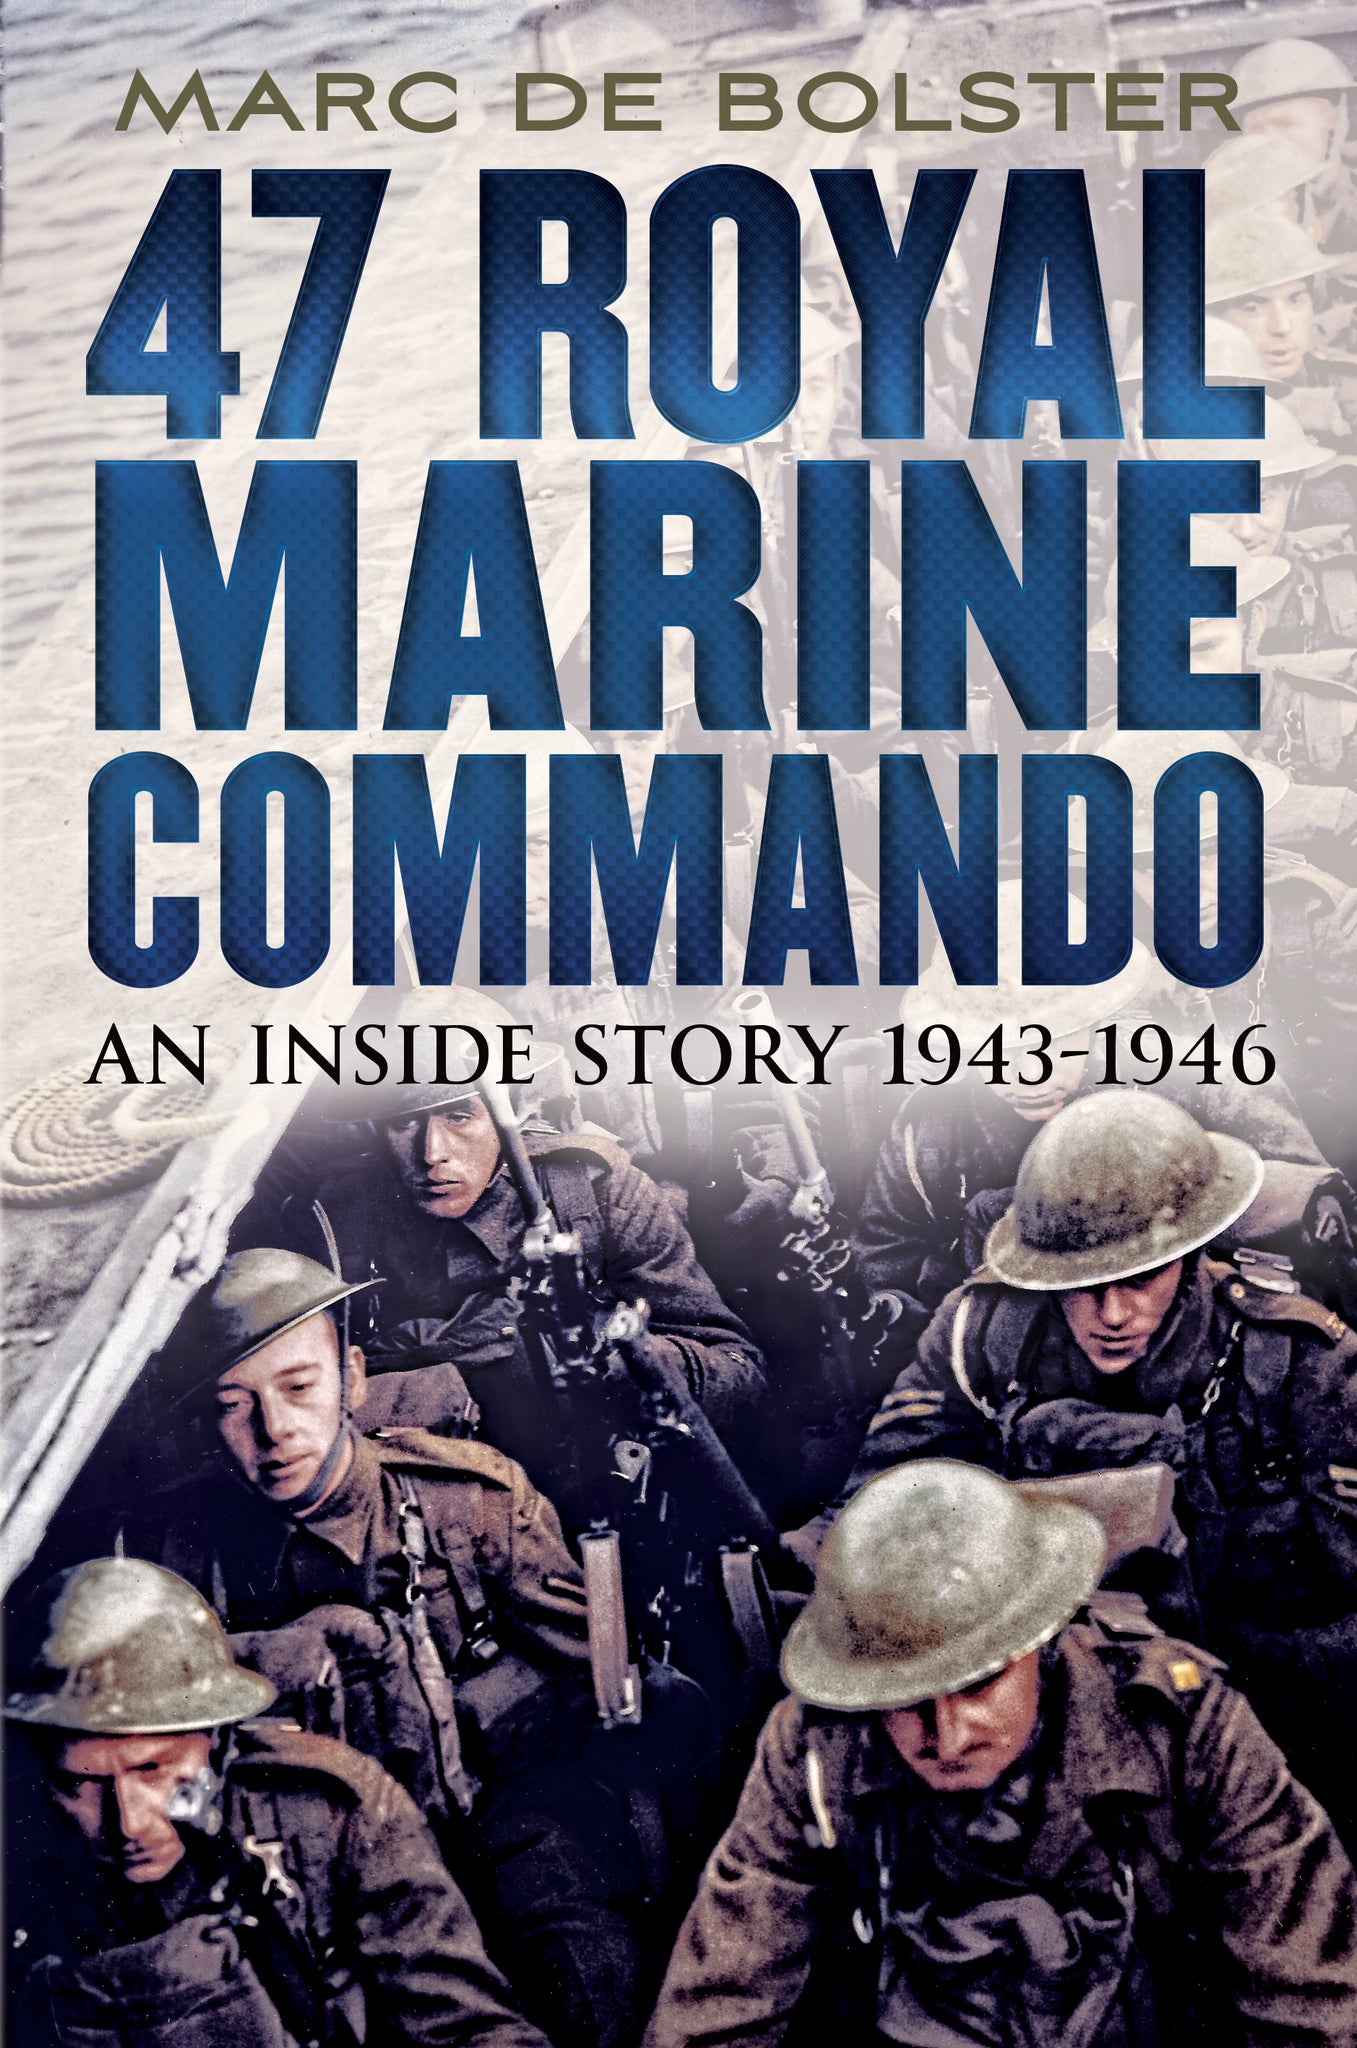 47 Royal Marine Commando: An Inside Story 1943-1946 - available now from Fonthill Media